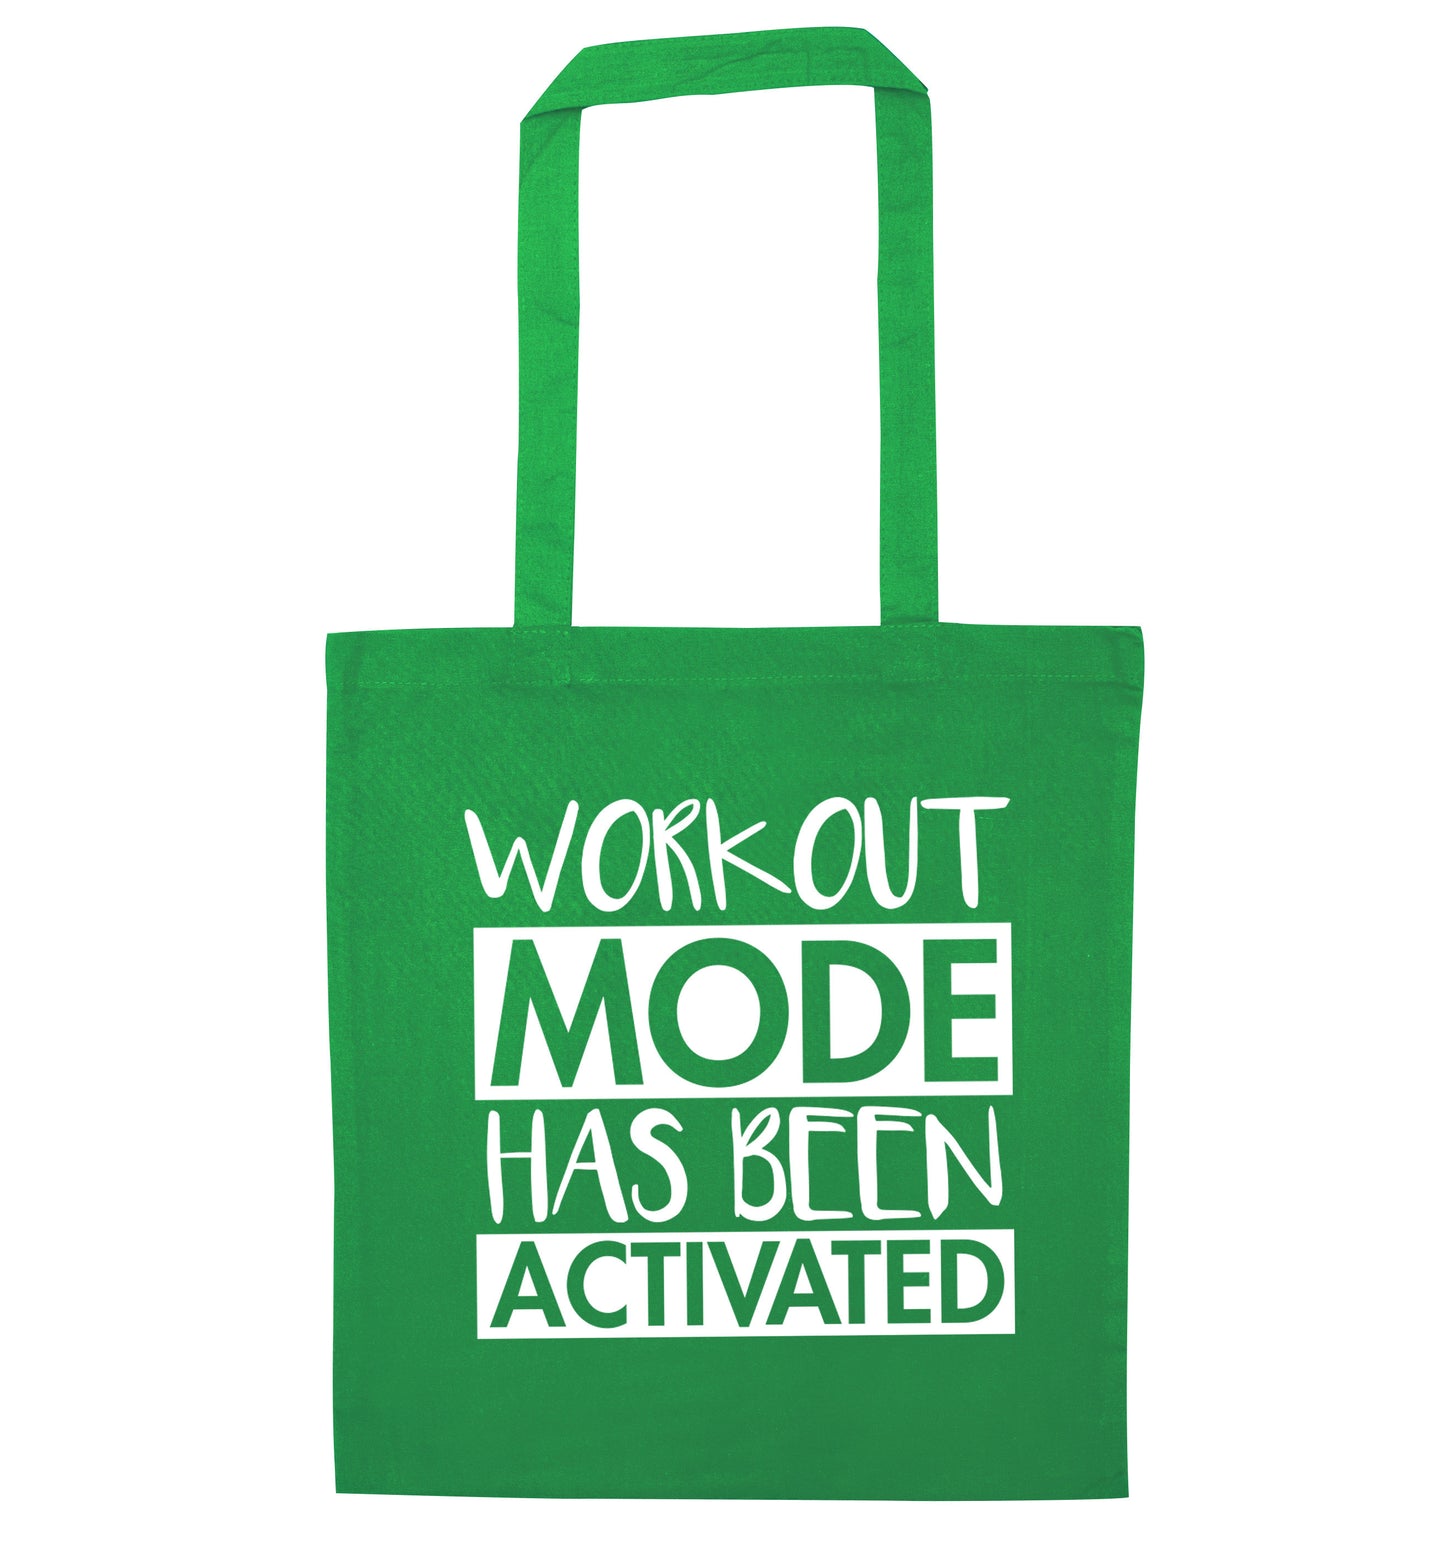 Workout mode has been activated green tote bag